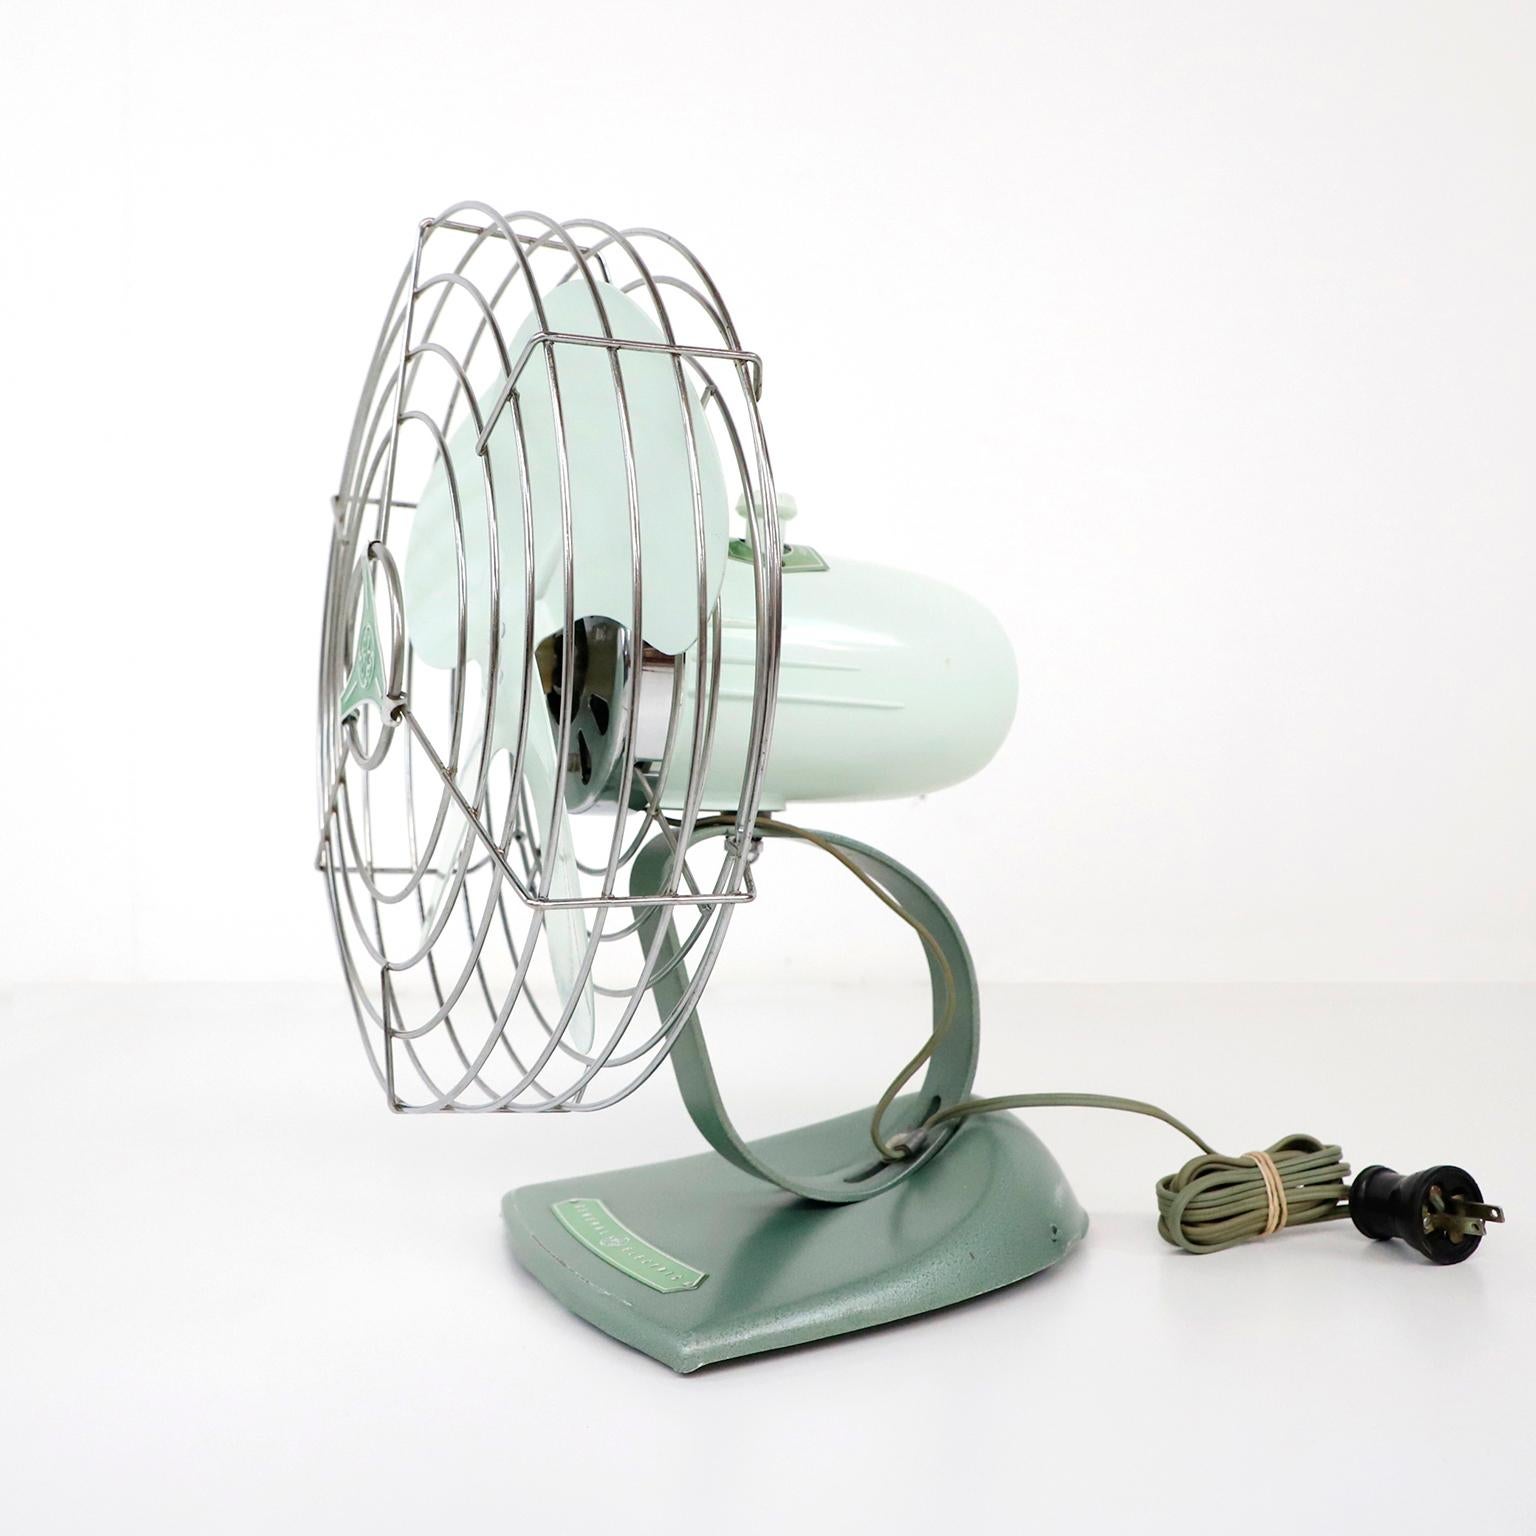 1950s Modern Electric Fan by General Electric in fantastic conditions, working at perfection.